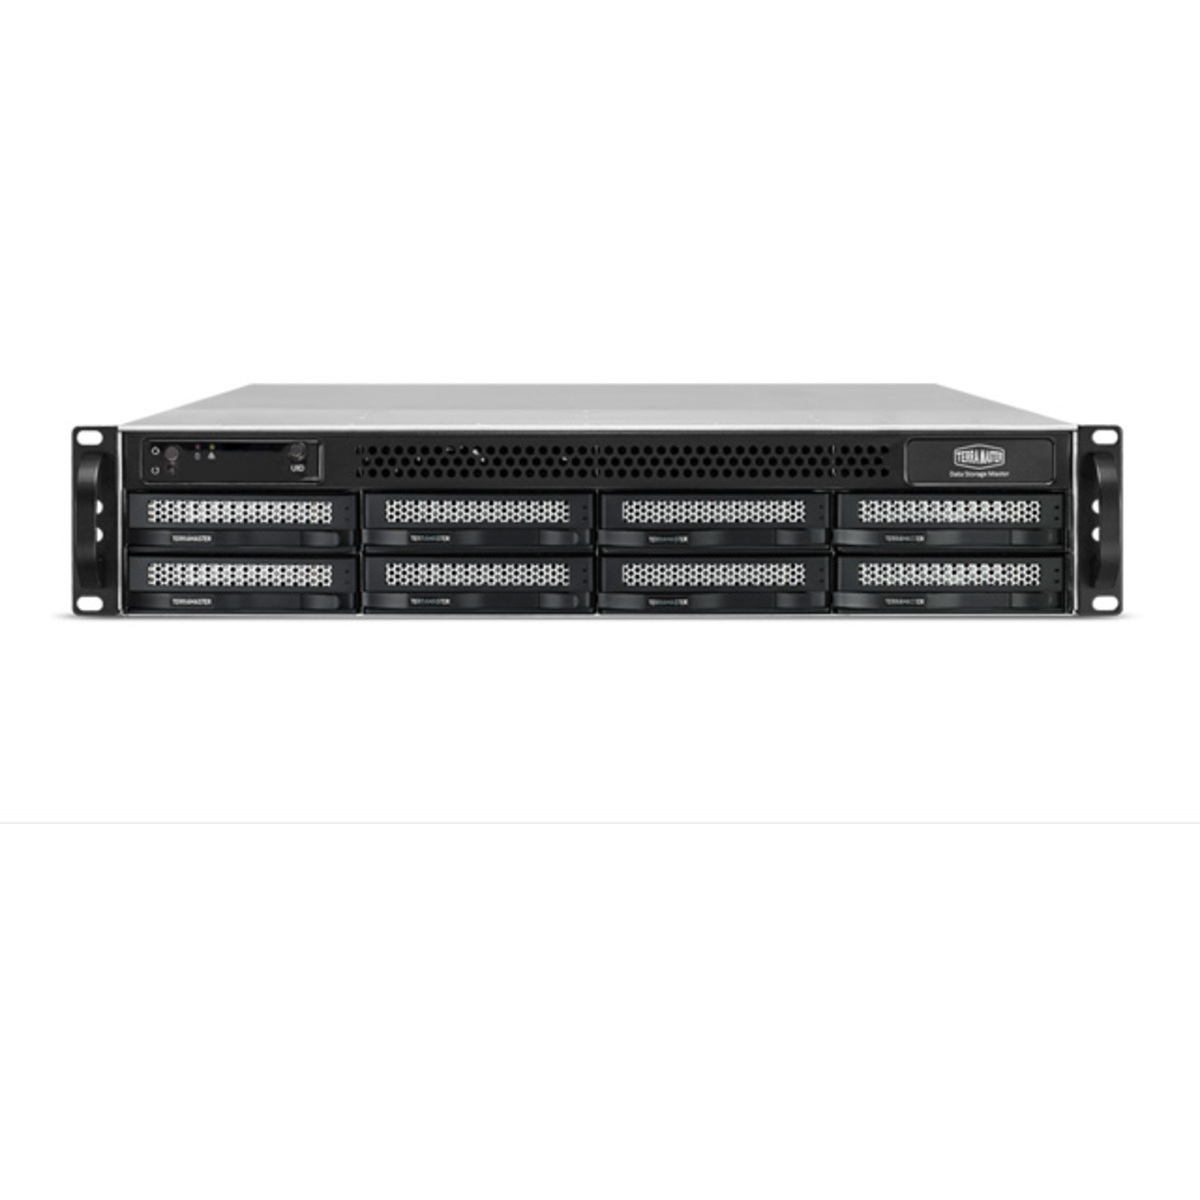 TerraMaster U8-423 70tb 8-Bay RackMount Multimedia / Power User / Business NAS - Network Attached Storage Device 5x14tb Seagate IronWolf Pro ST14000NT001 3.5 7200rpm SATA 6Gb/s HDD NAS Class Drives Installed - Burn-In Tested - FREE RAM UPGRADE U8-423